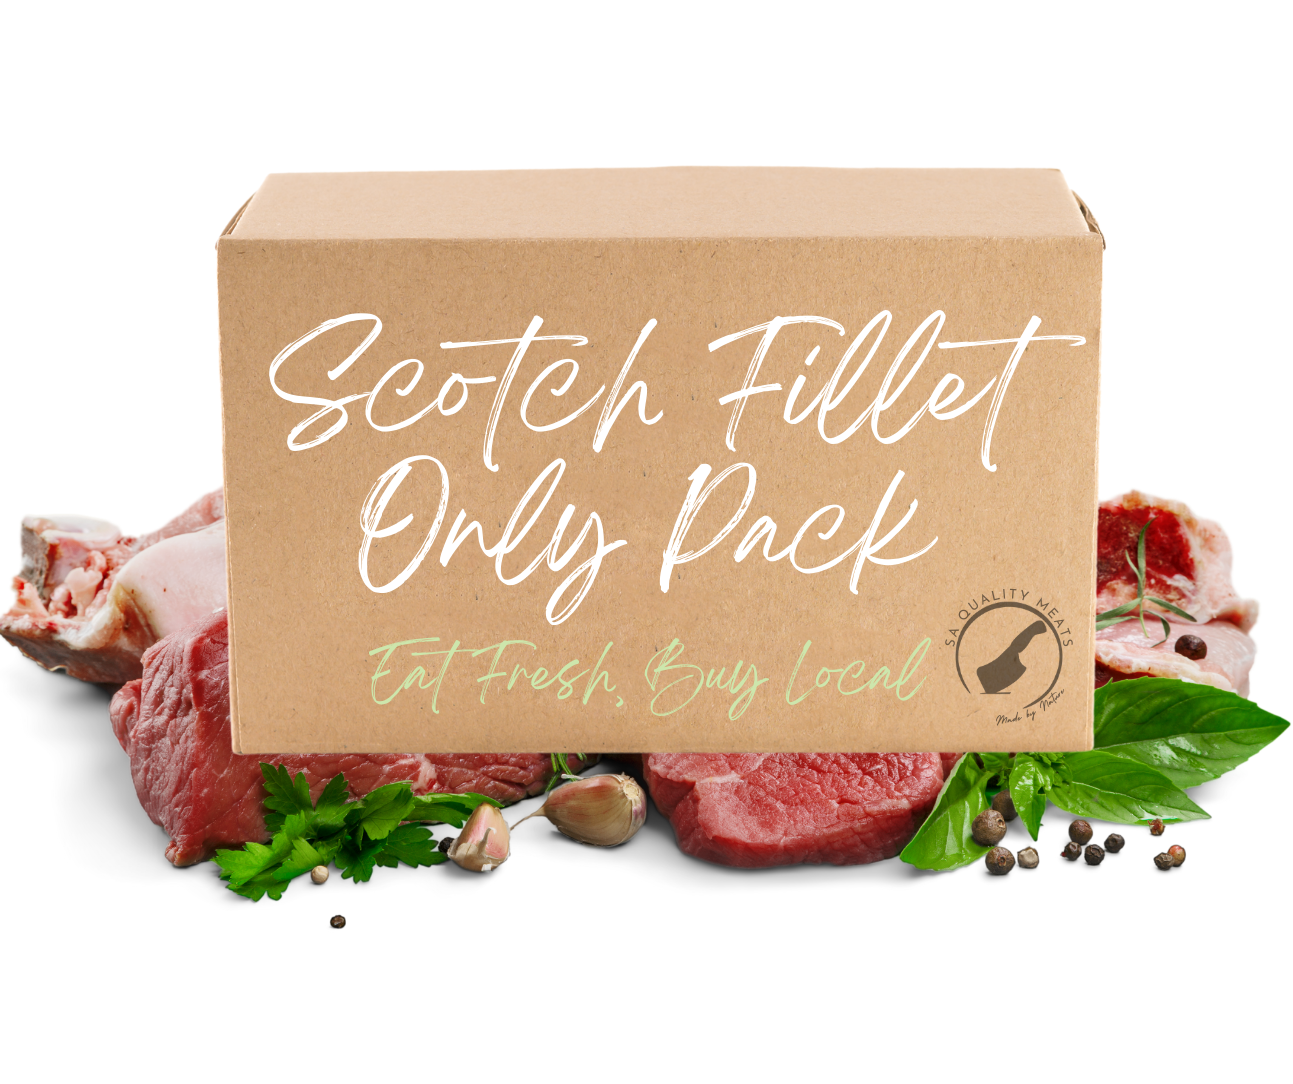 Scotch Fillet Only Meat Pack